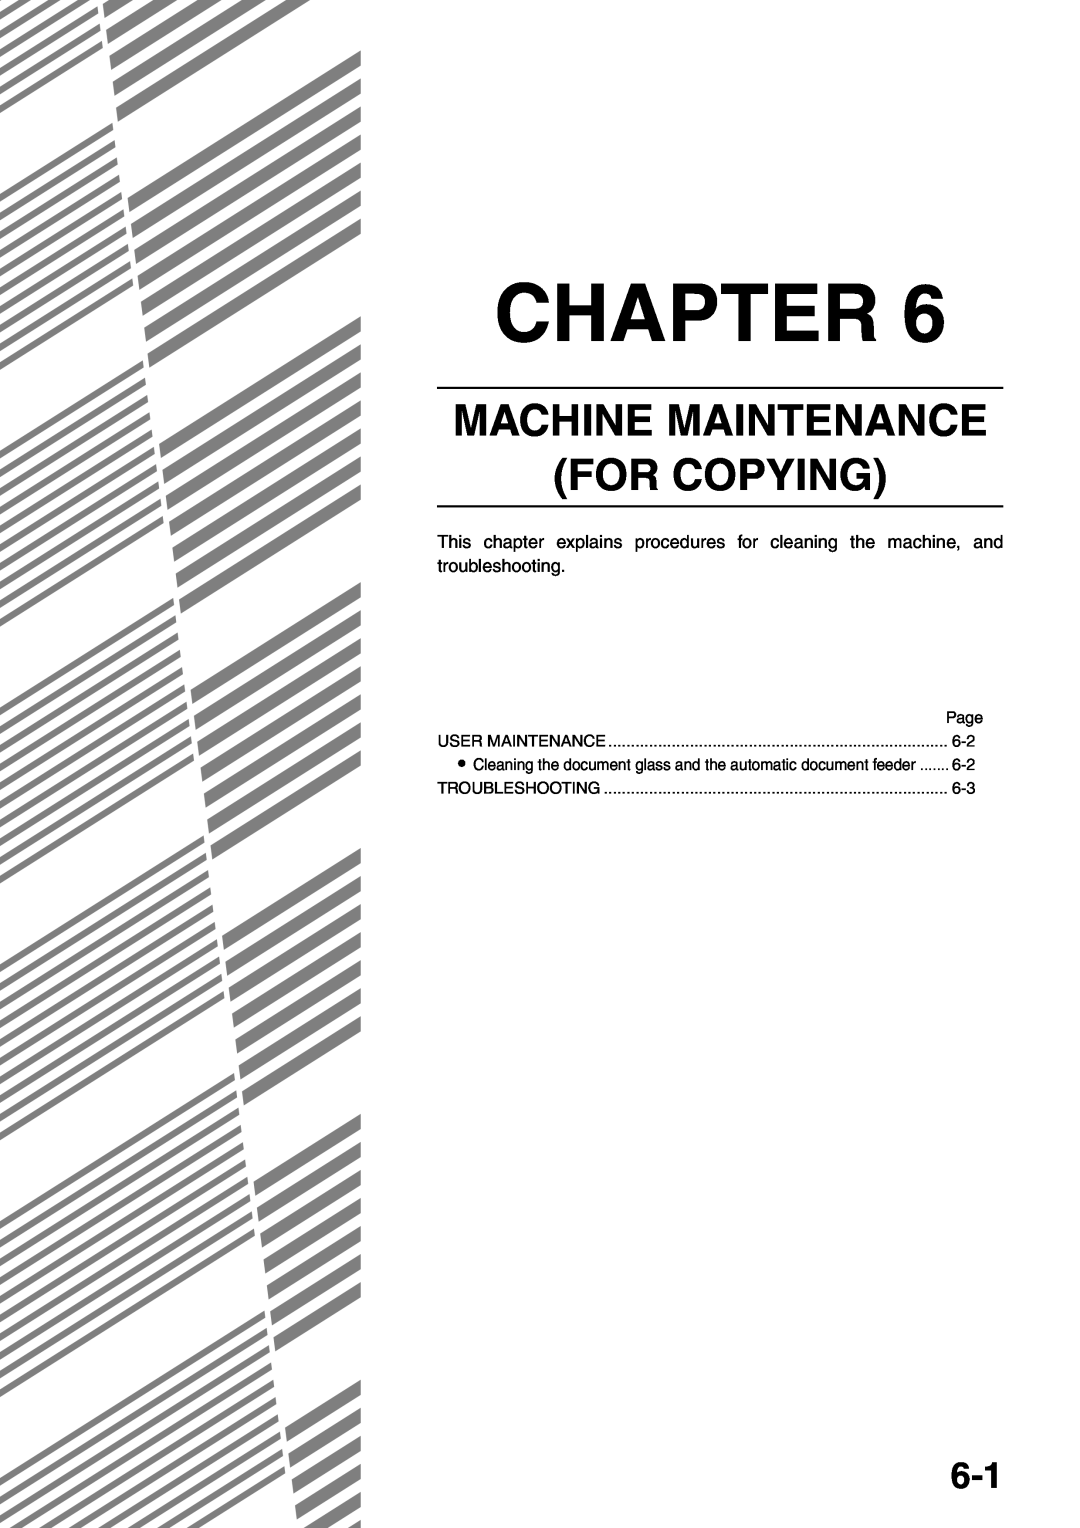 Sharp MX-M620U, MX-M700N, MX-M550U, MX-M620N, MX-M700U, MX-M550N specifications Machine Maintenance For Copying, Chapter, Page 